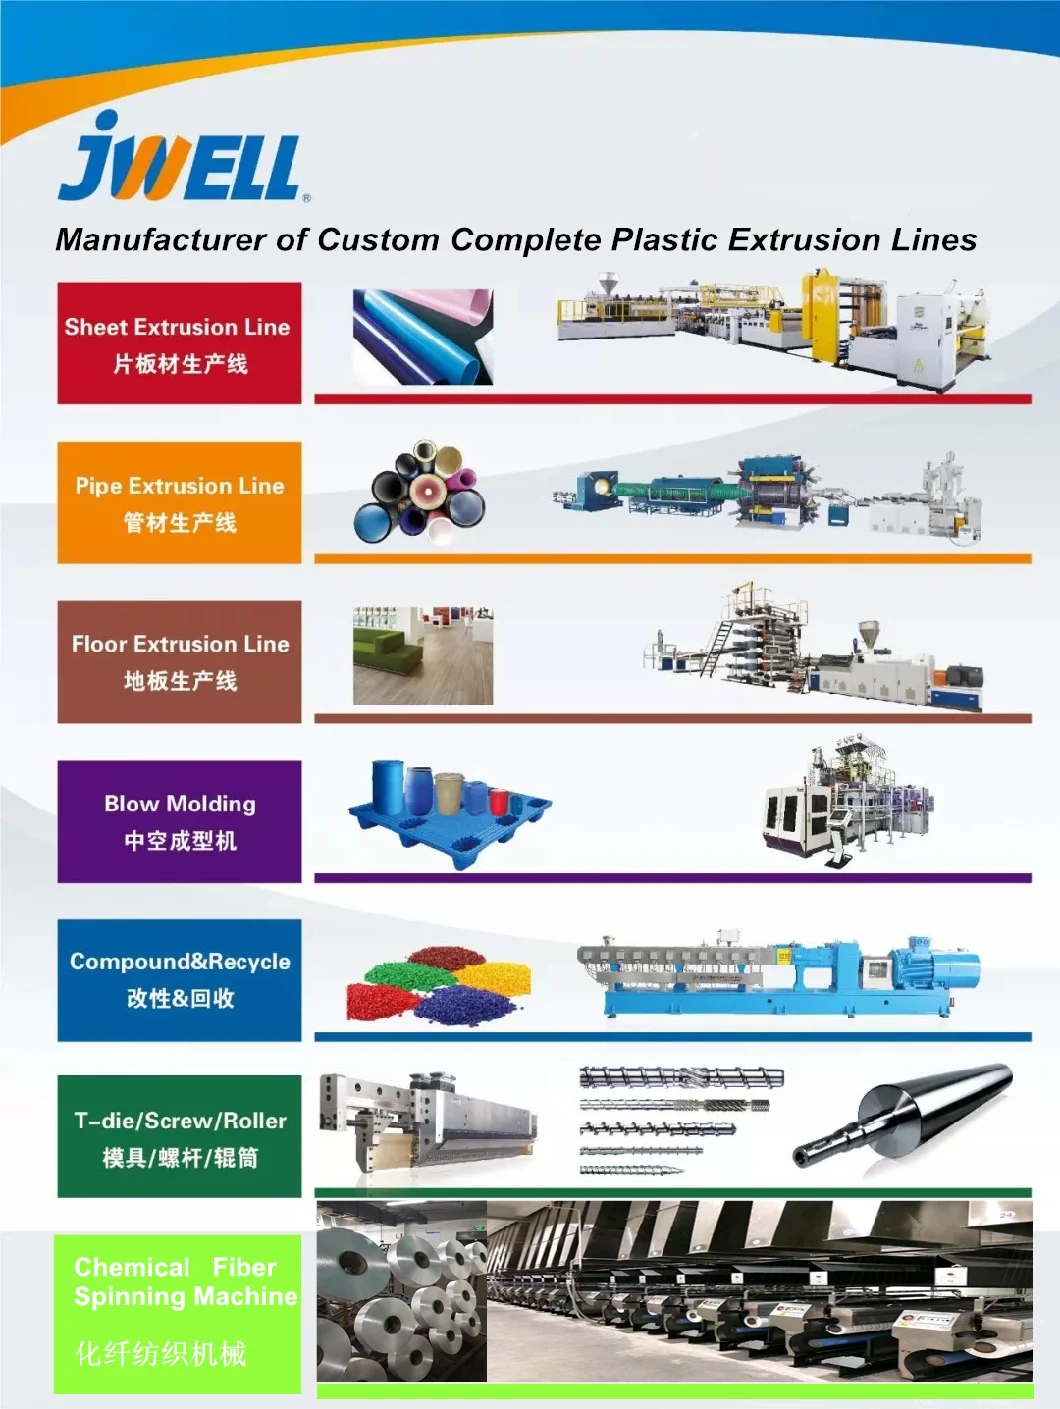 Jwell Automatic Plastic Two Four Mount High Output PVC UPVC CPVC Pipe Extrusion Making Machine